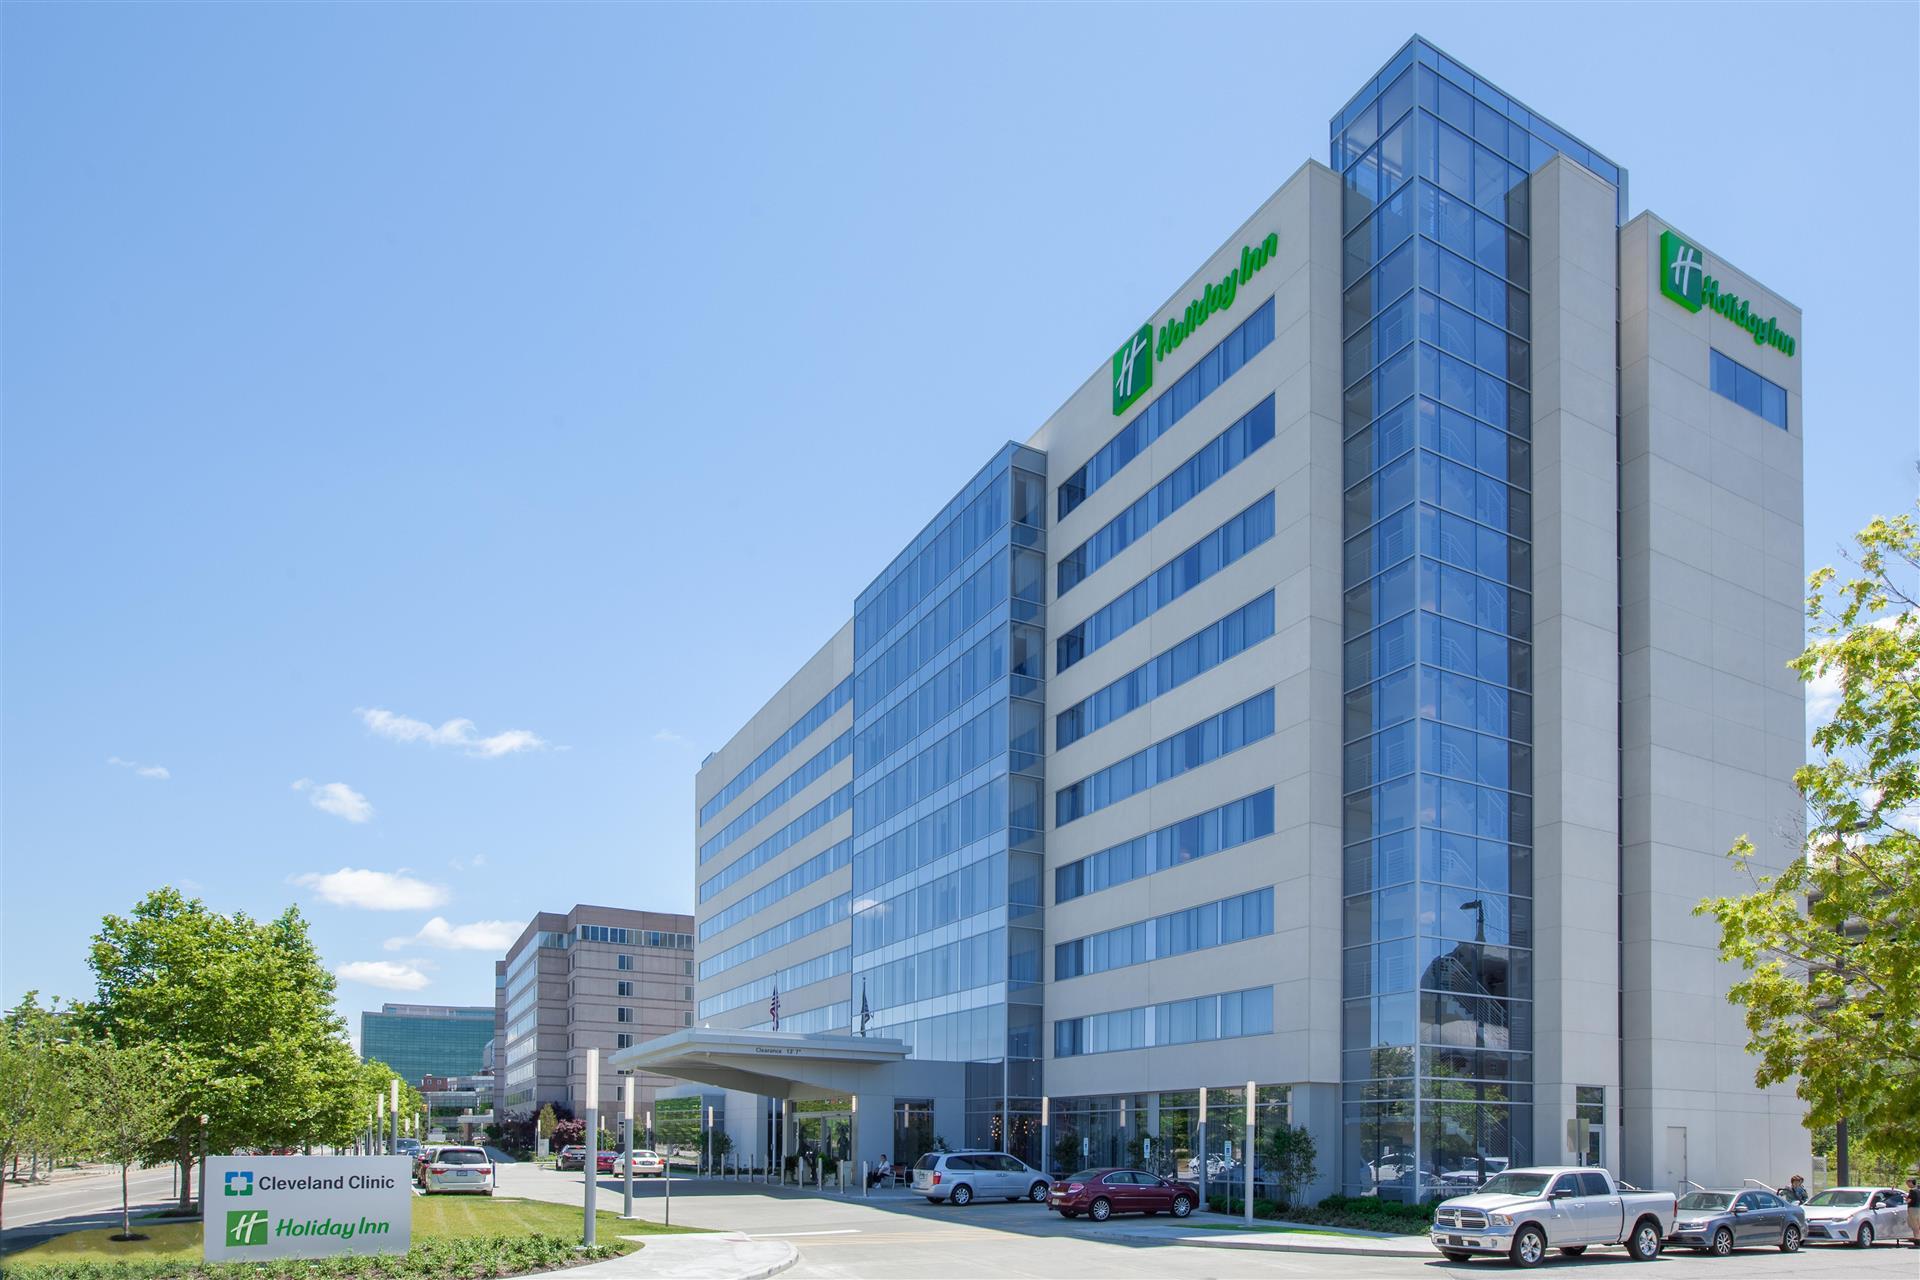 Holiday Inn Cleveland Clinic in Cleveland, OH